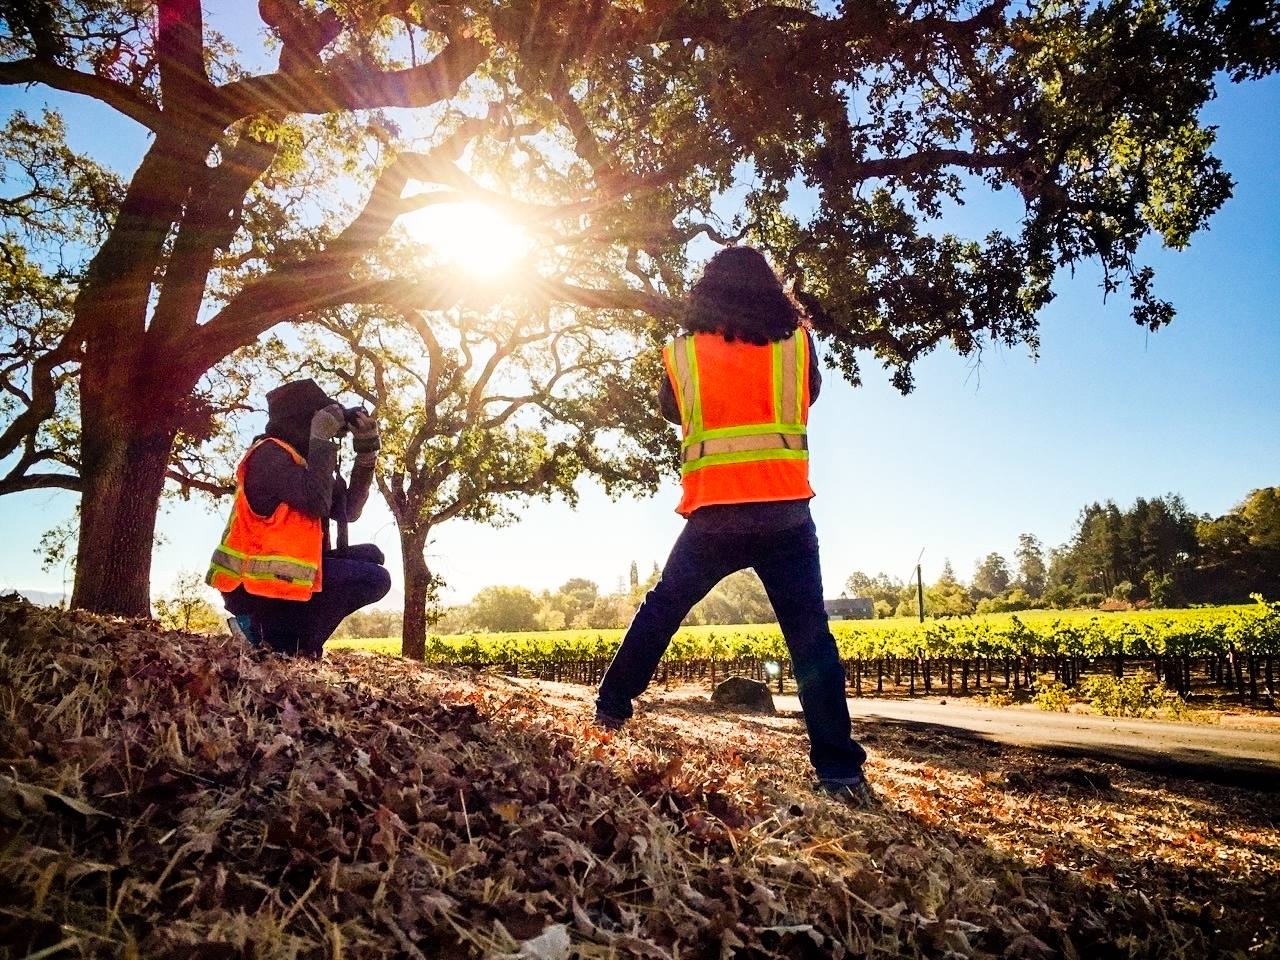 Stephen-Austin-Welch-director-photographer-behind-the-scenes-bts-safety-vests-winery